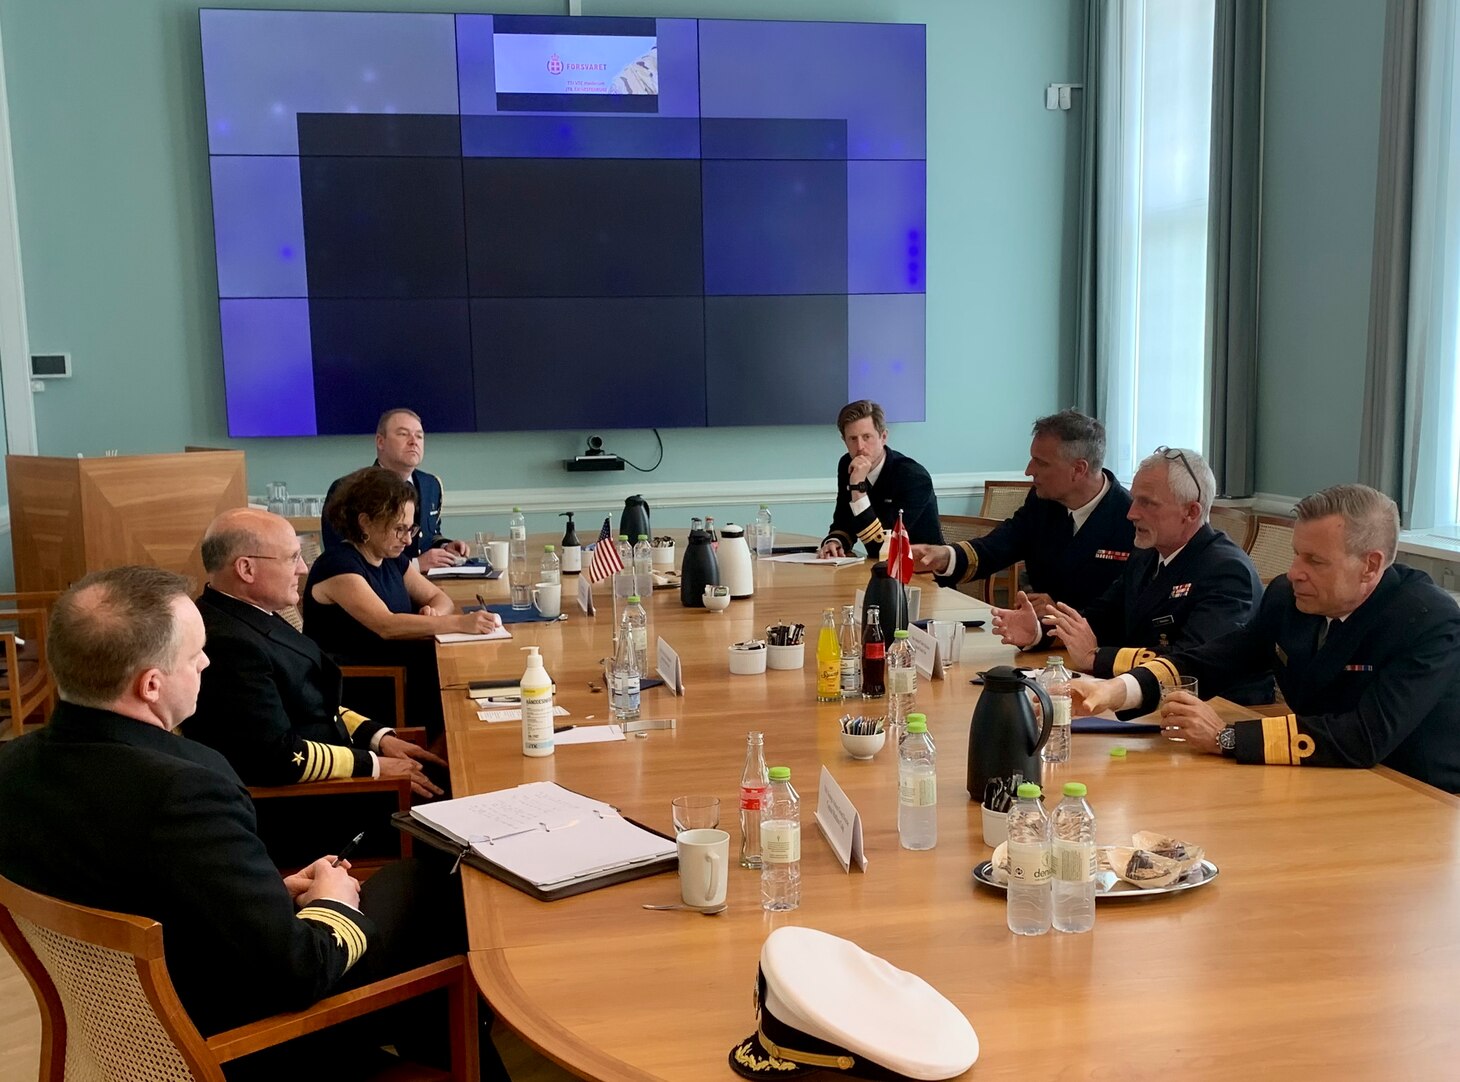 COPENHAGEN (June 1, 2021) Chief of Naval Operations (CNO) Adm. Mike Gilday meets with Chief of the Royal Danish Navy Rear Adm. Torben Mikkelsen during a visit to Copenhagen. Gilday visited Denmark to meet with his Navy counterpart as well as other senior Danish leadership to discuss areas for continued mutual cooperation. The U.S. Navy and the Royal Danish Navy routinely operate together throughout the globe, specifically in anti-submarine warfare and integrated air and missile defense. (U.S. Navy photo by Cmdr. Nate Christensen/Released)